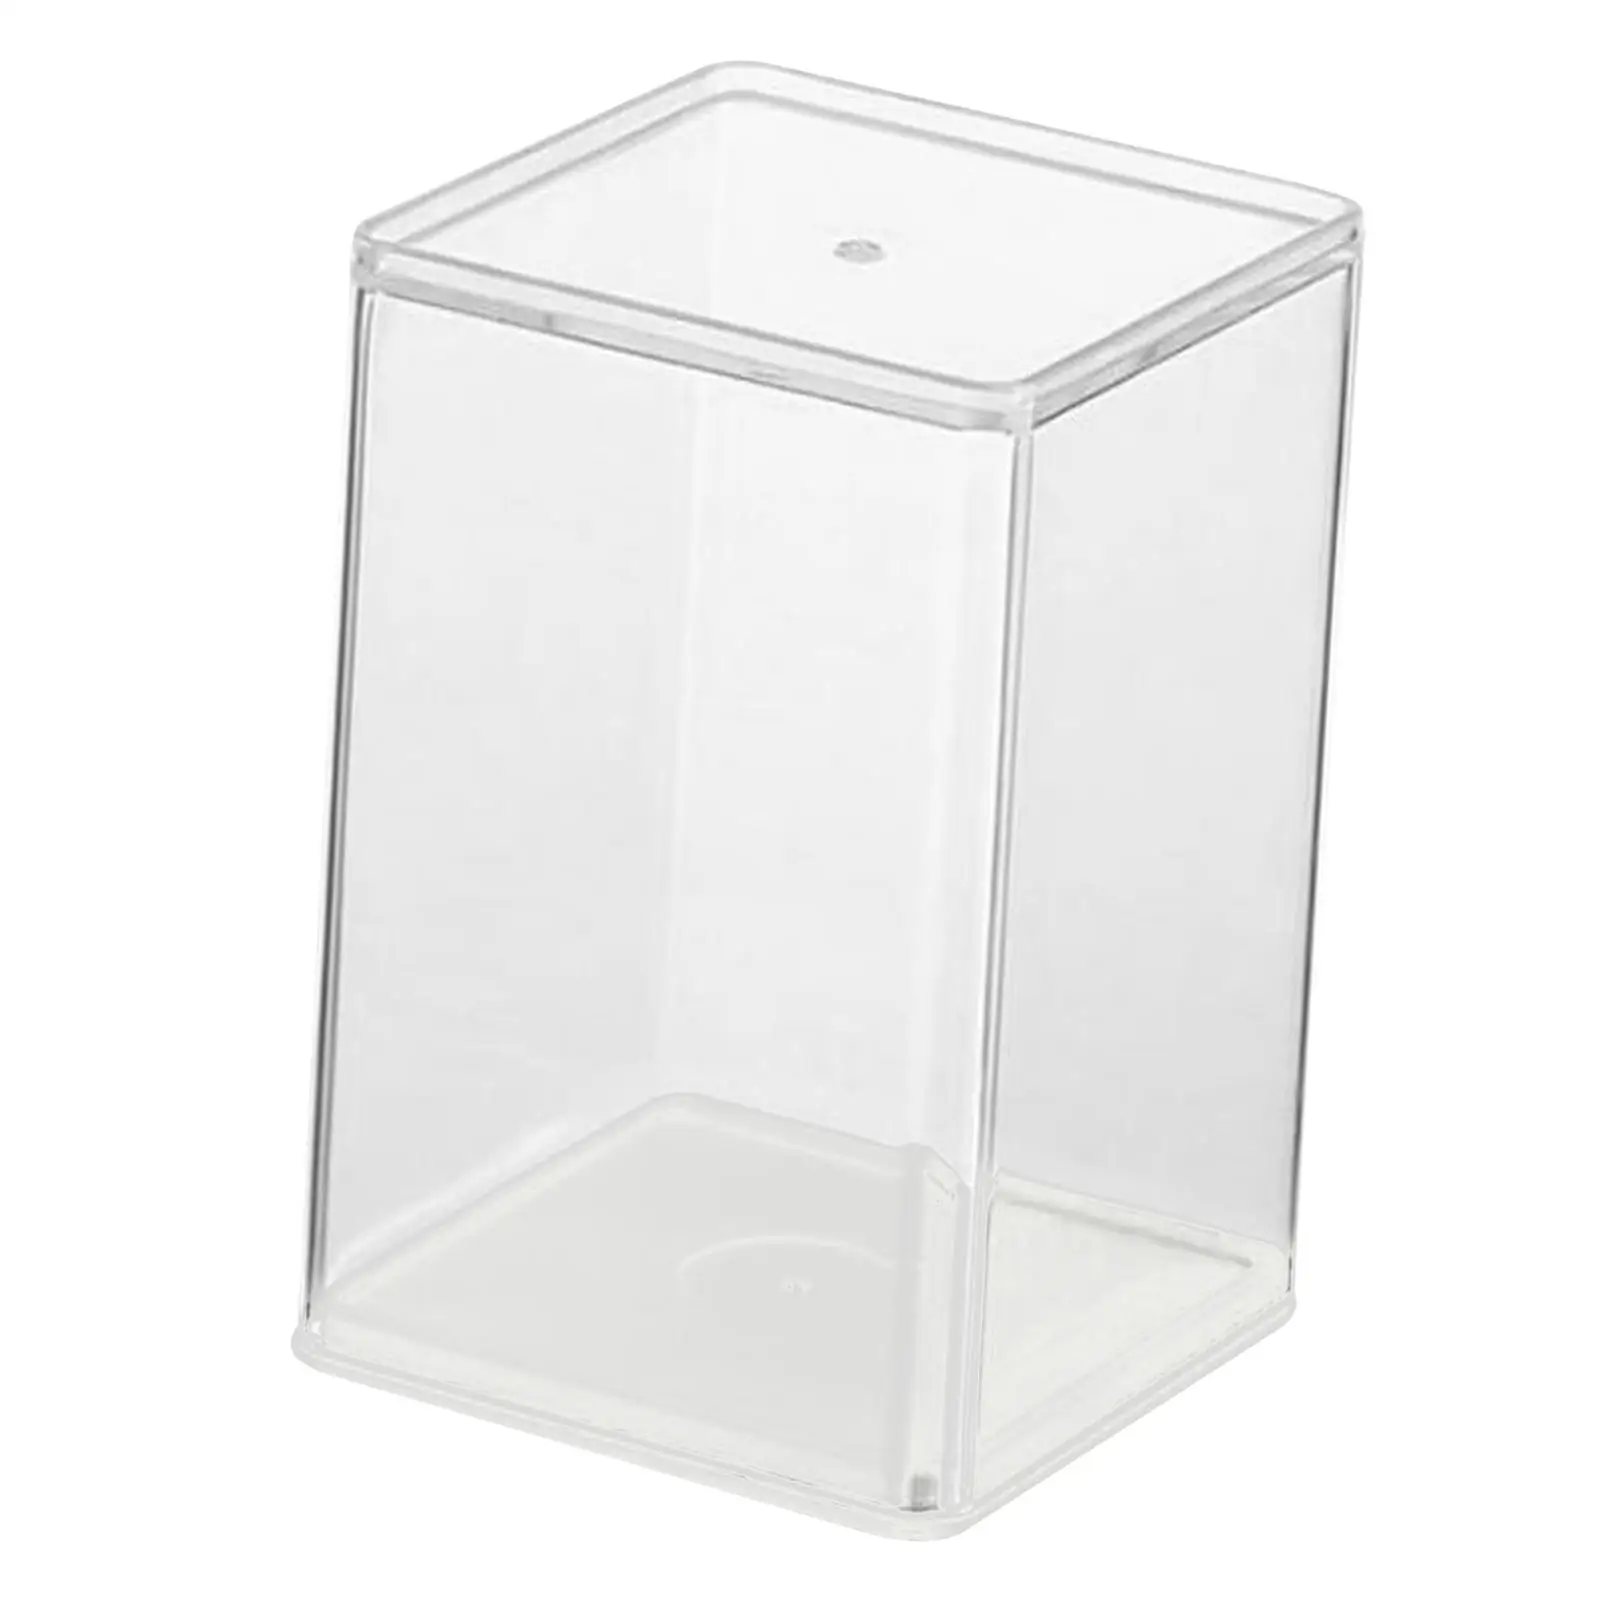 Transparent Acrylic Display Rack Container Dustproof Vertical Storage Box Dust Cabinet Protector for Toys Action Figures Adult